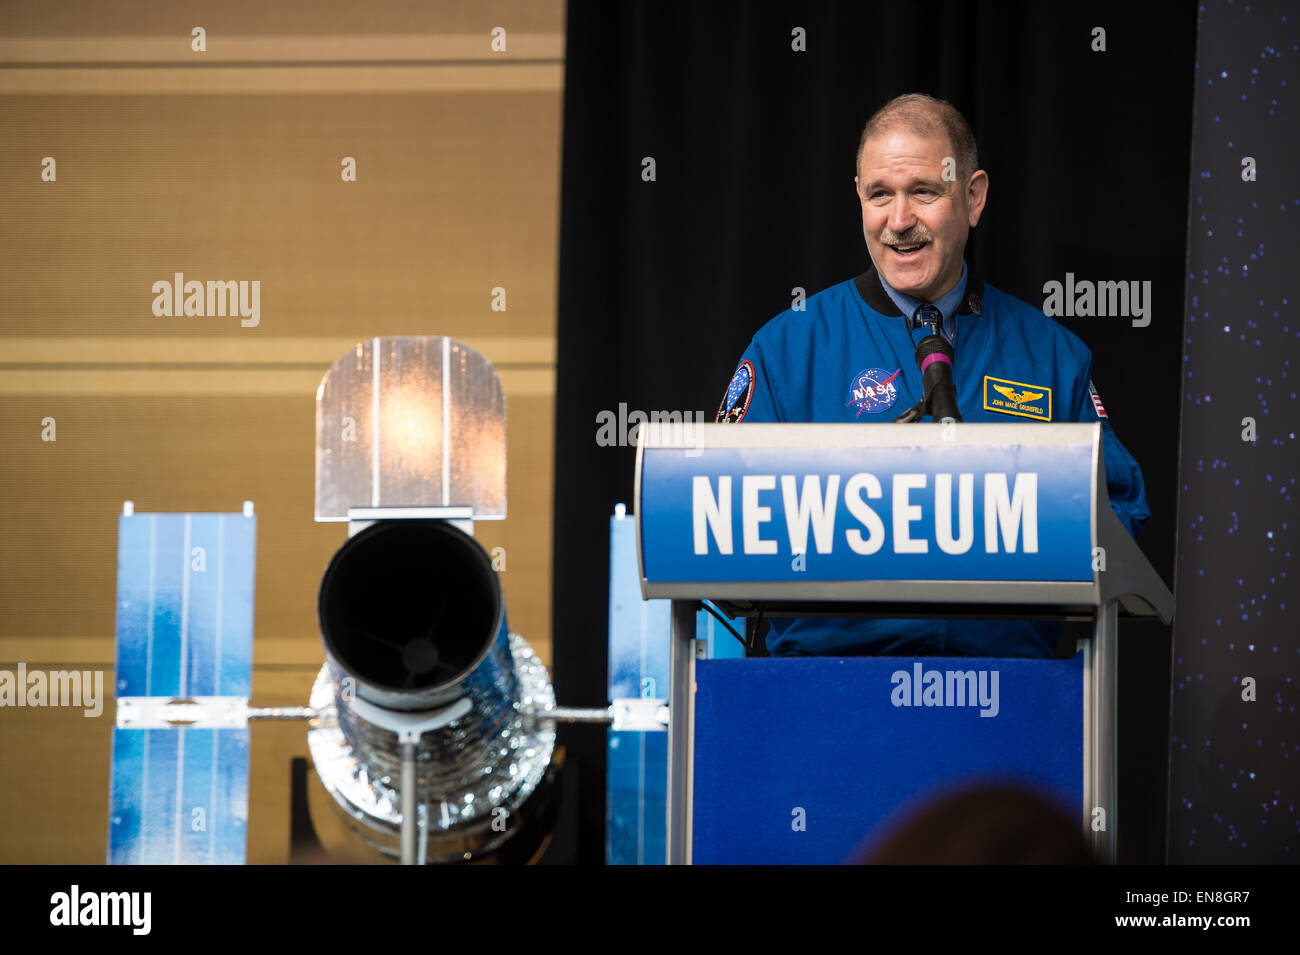 John Grunsfeld, associate administrator, Science Mission Directorate, NASA, speaks at the Hubble 25th Anniversary official image debut event on Thursday, April 23, 2015 at the Newseum in Washington, DC. The official image from Hubble's near-infrared Wide Field Camera 3 is of a two million year old cluster of about 3,000 stars called Westerlund 2, named after the astronomer who discovered it in the 1960s. Westerlund 2 is located in the constellation Carina about 20,000 light-years away from Earth. Stock Photo